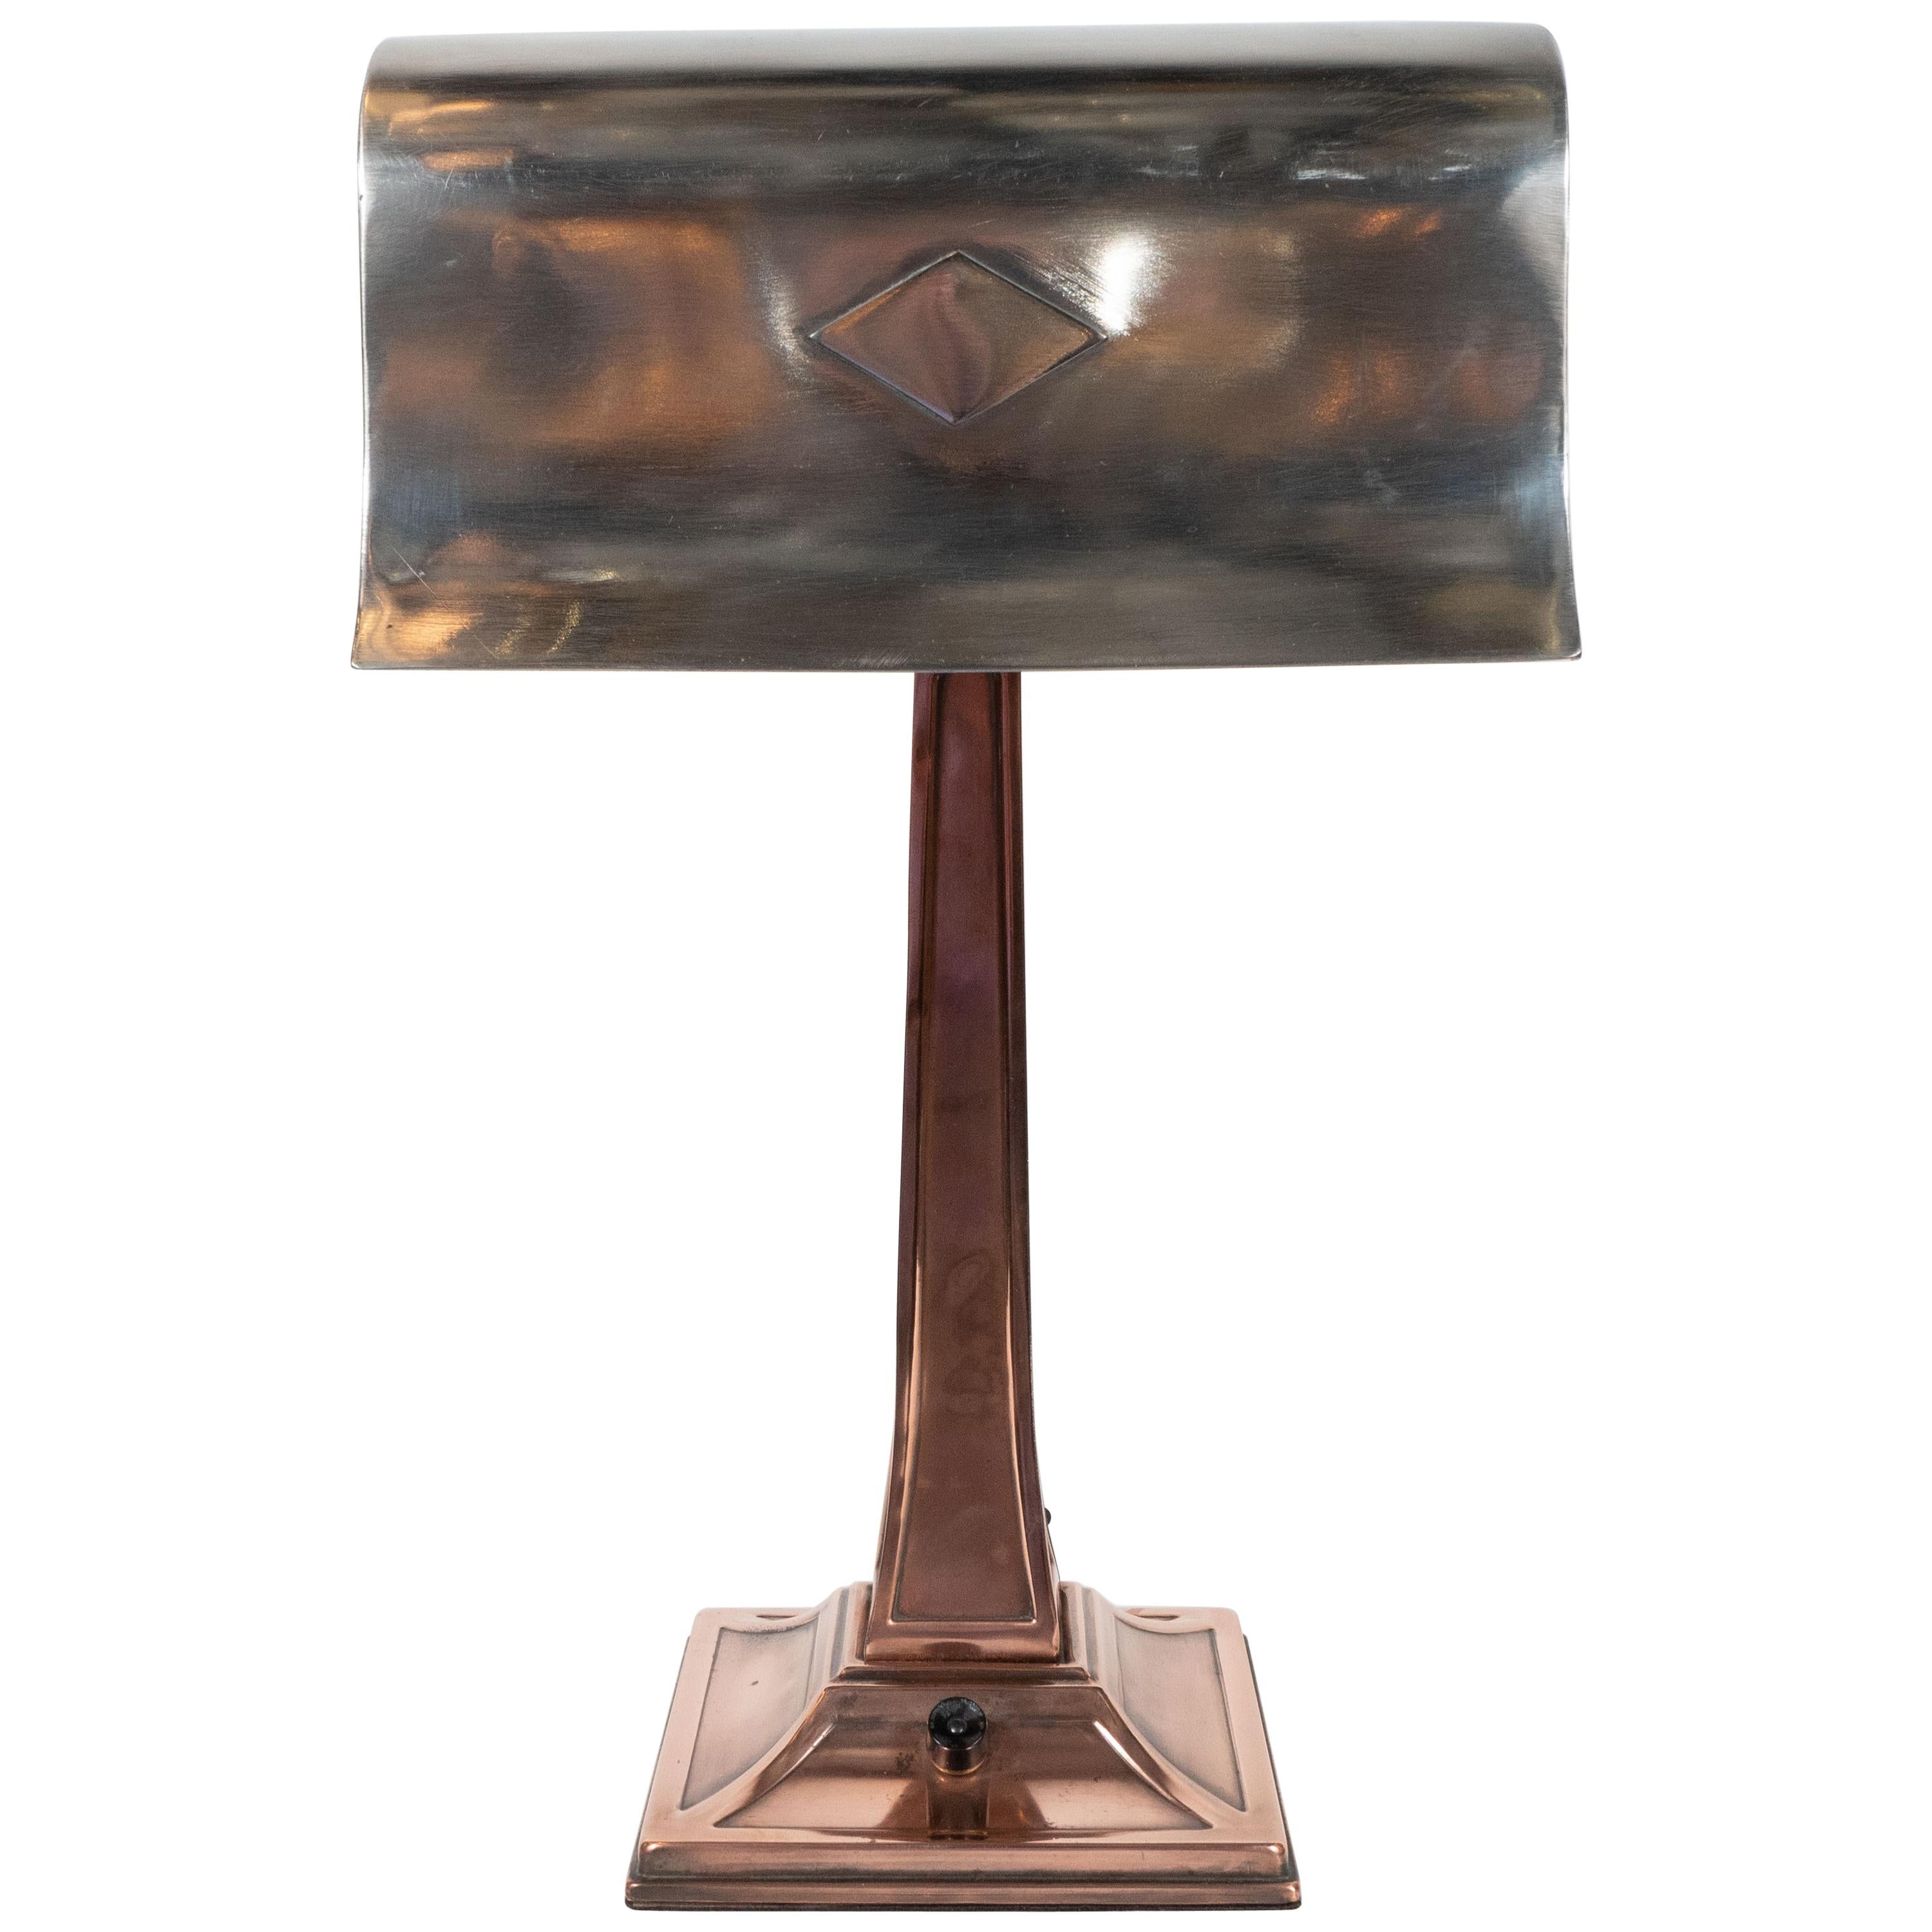 Early Art Deco Copper & Polished Aluminum Table Lamp with Cubist Embellishment For Sale